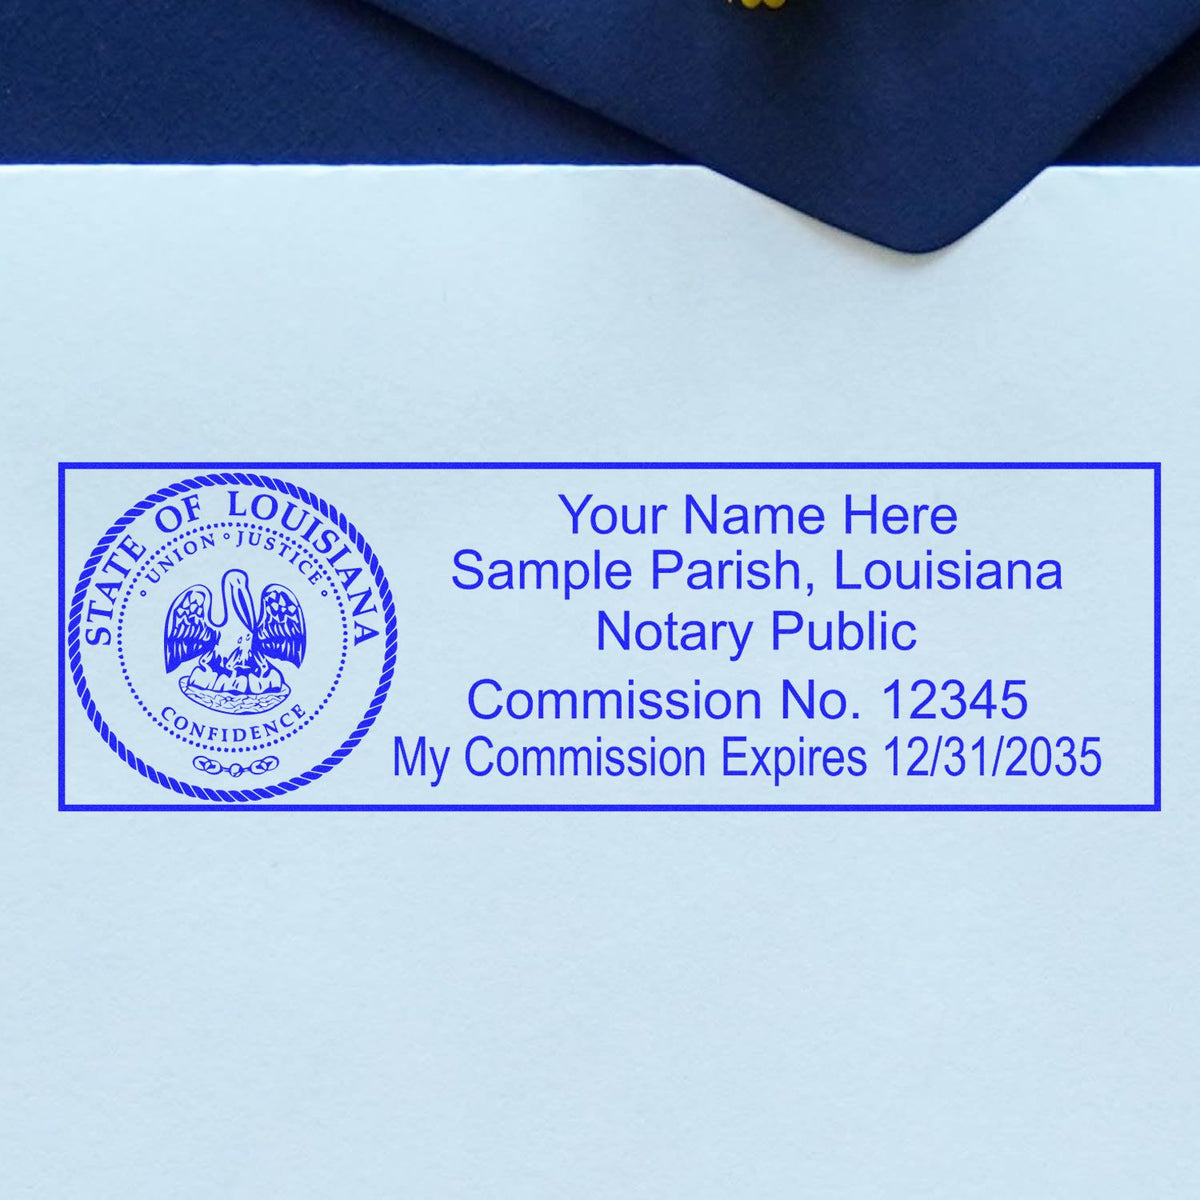 The PSI Louisiana Notary Stamp stamp impression comes to life with a crisp, detailed photo on paper - showcasing true professional quality.